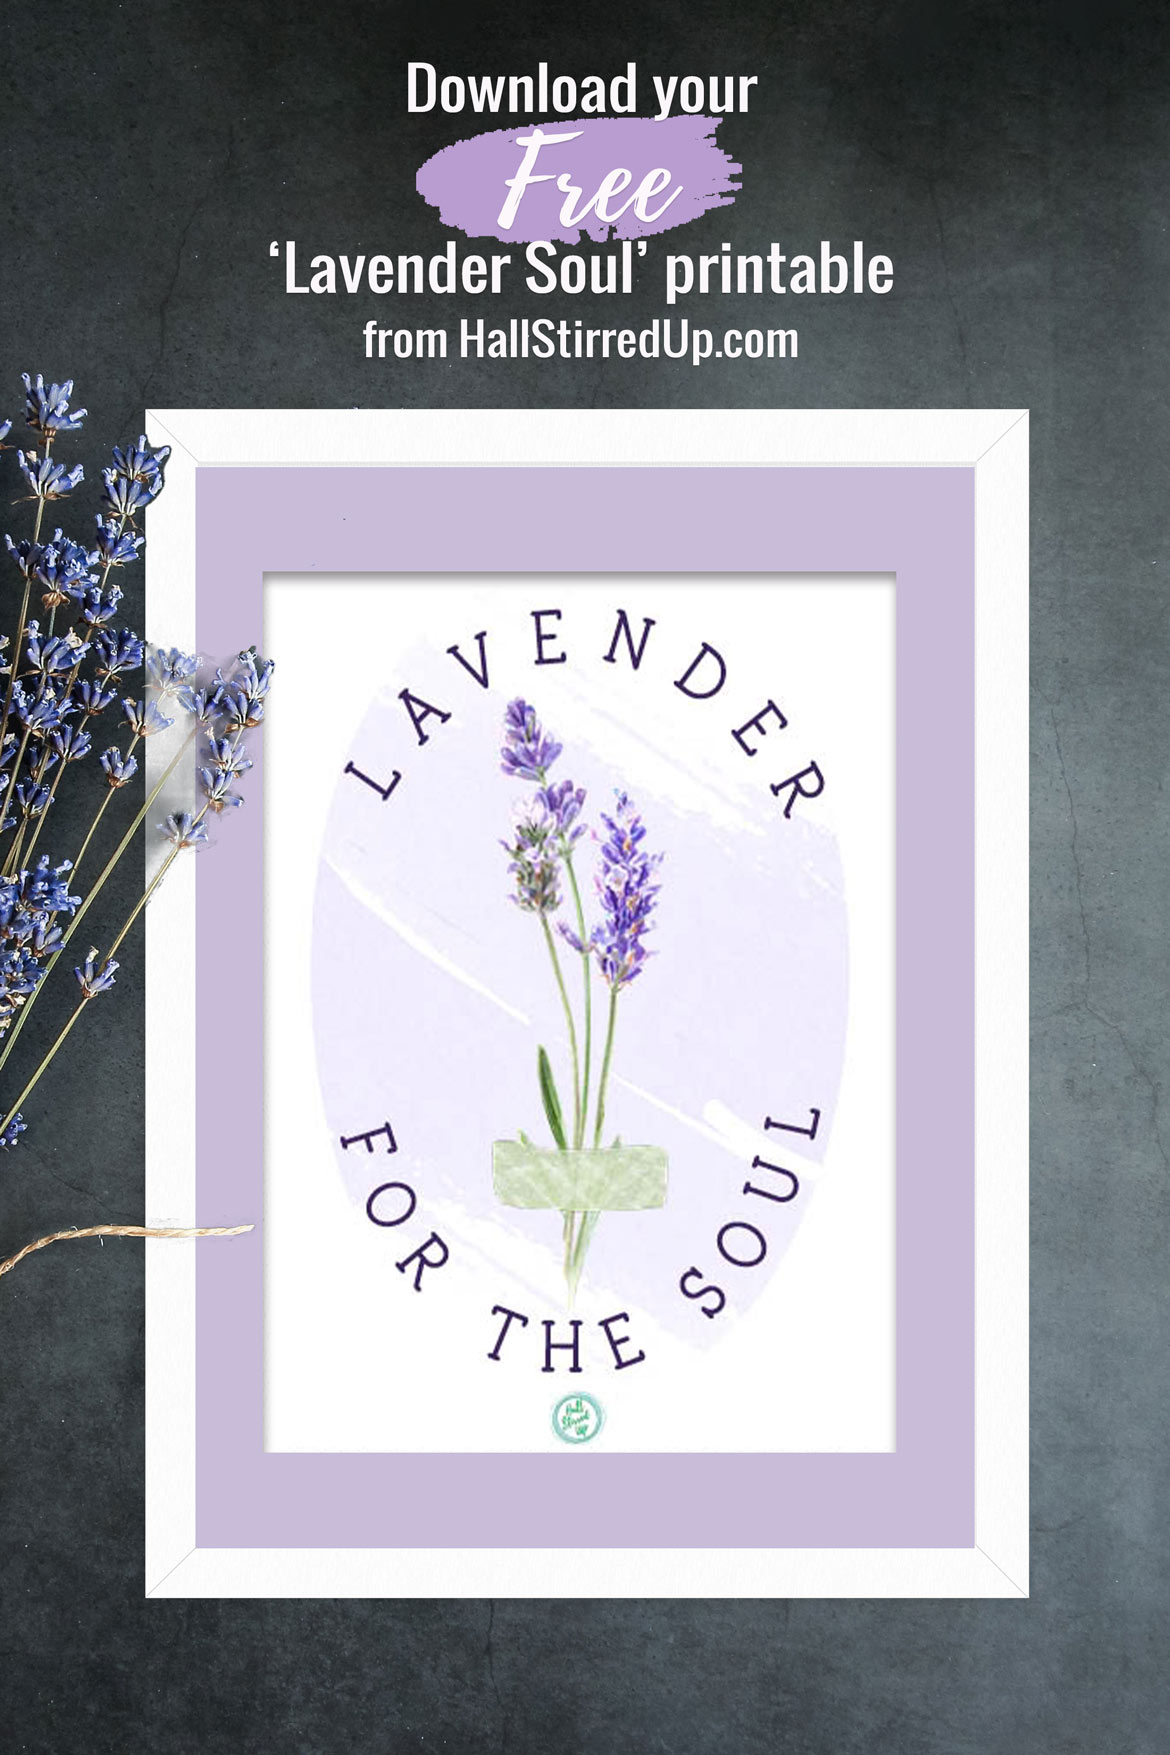 Favorite Lavender quotes and a pretty free printable